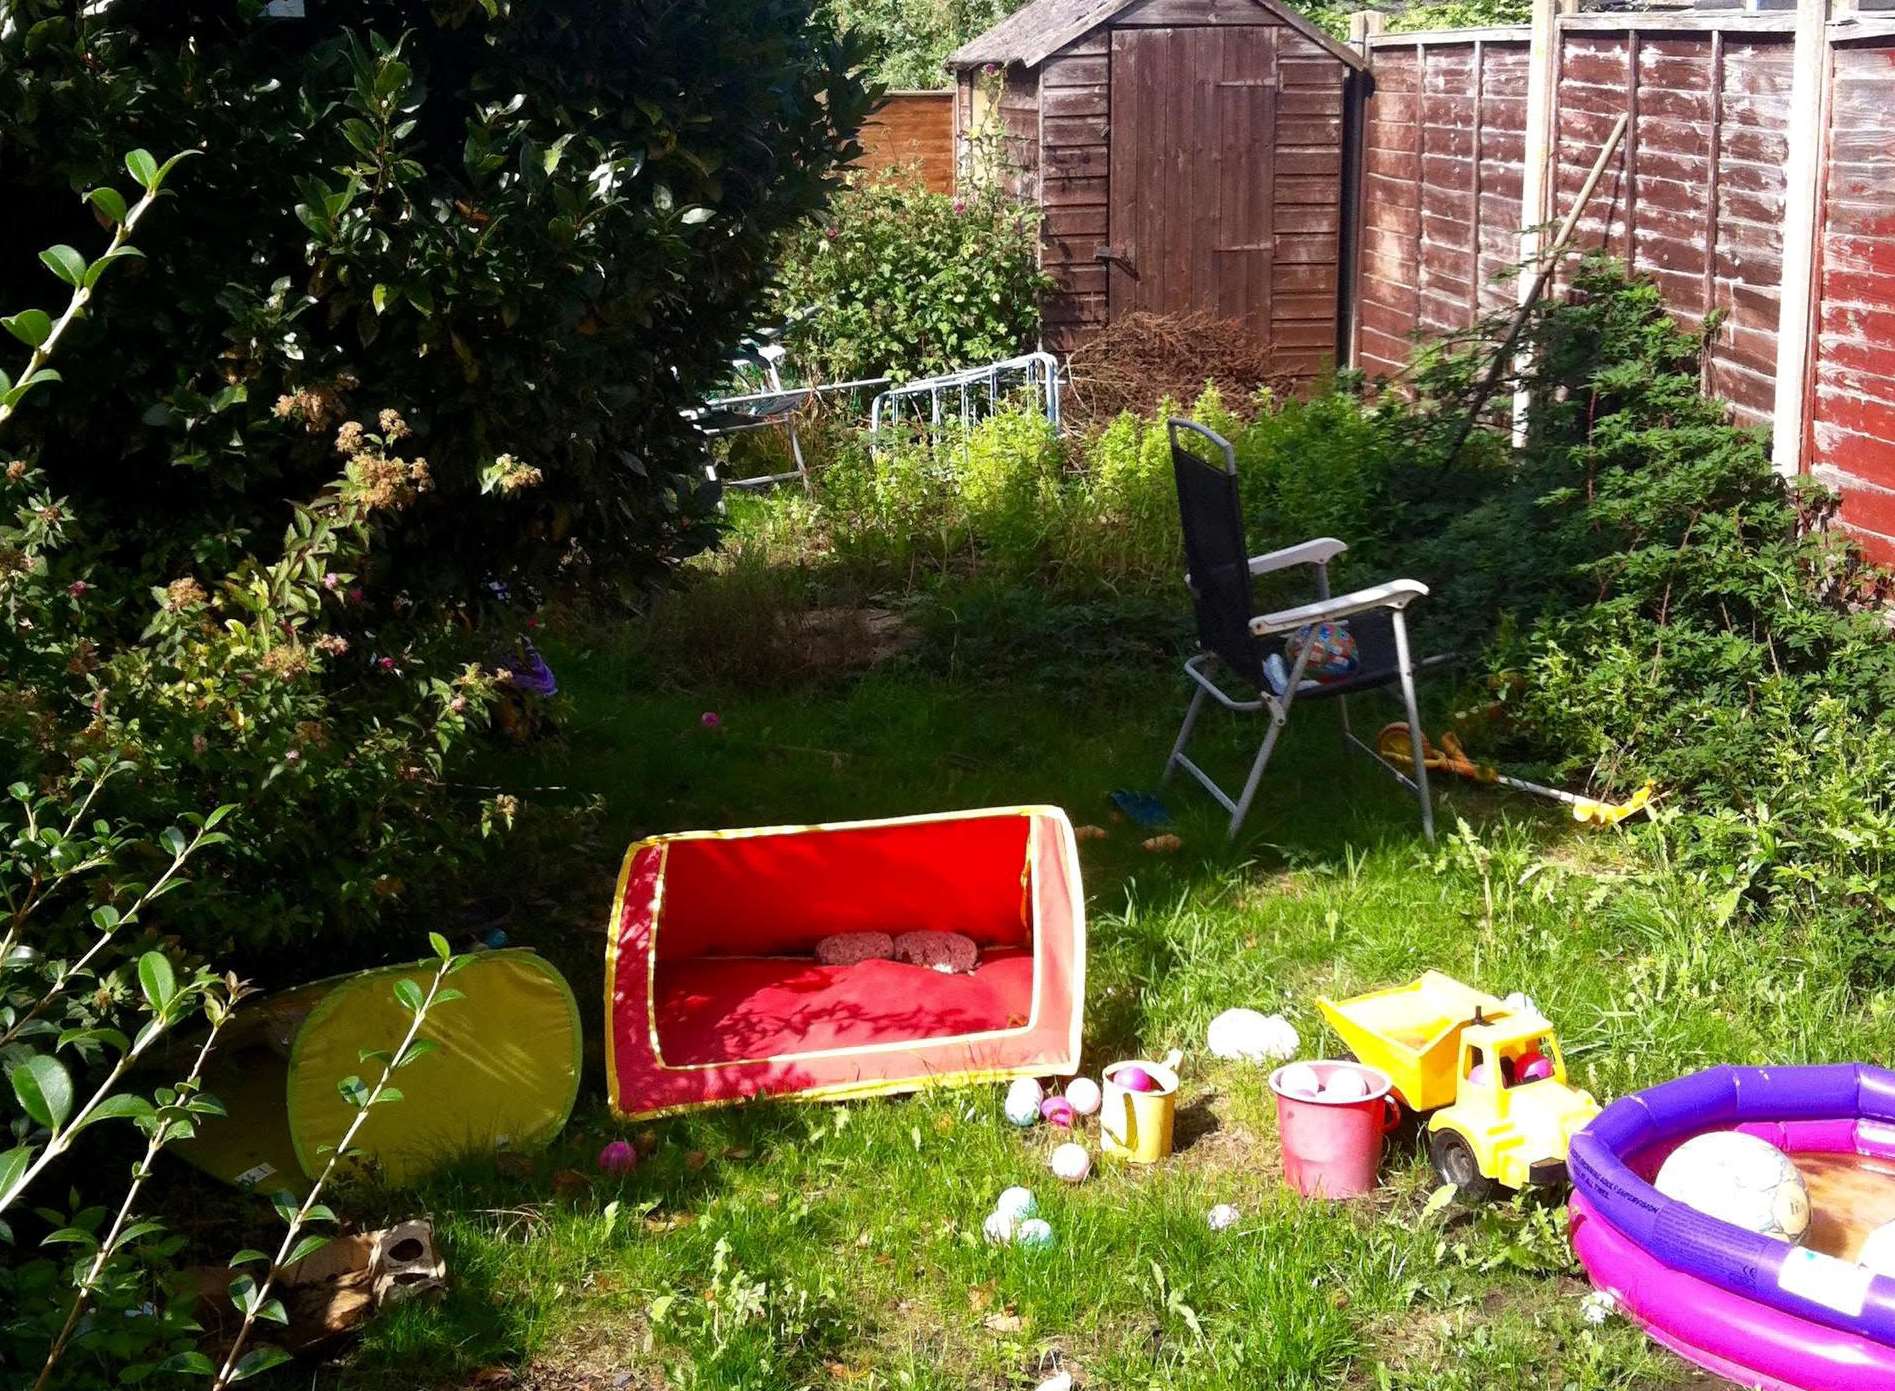 The garden was overgrown and strewn with rubbish